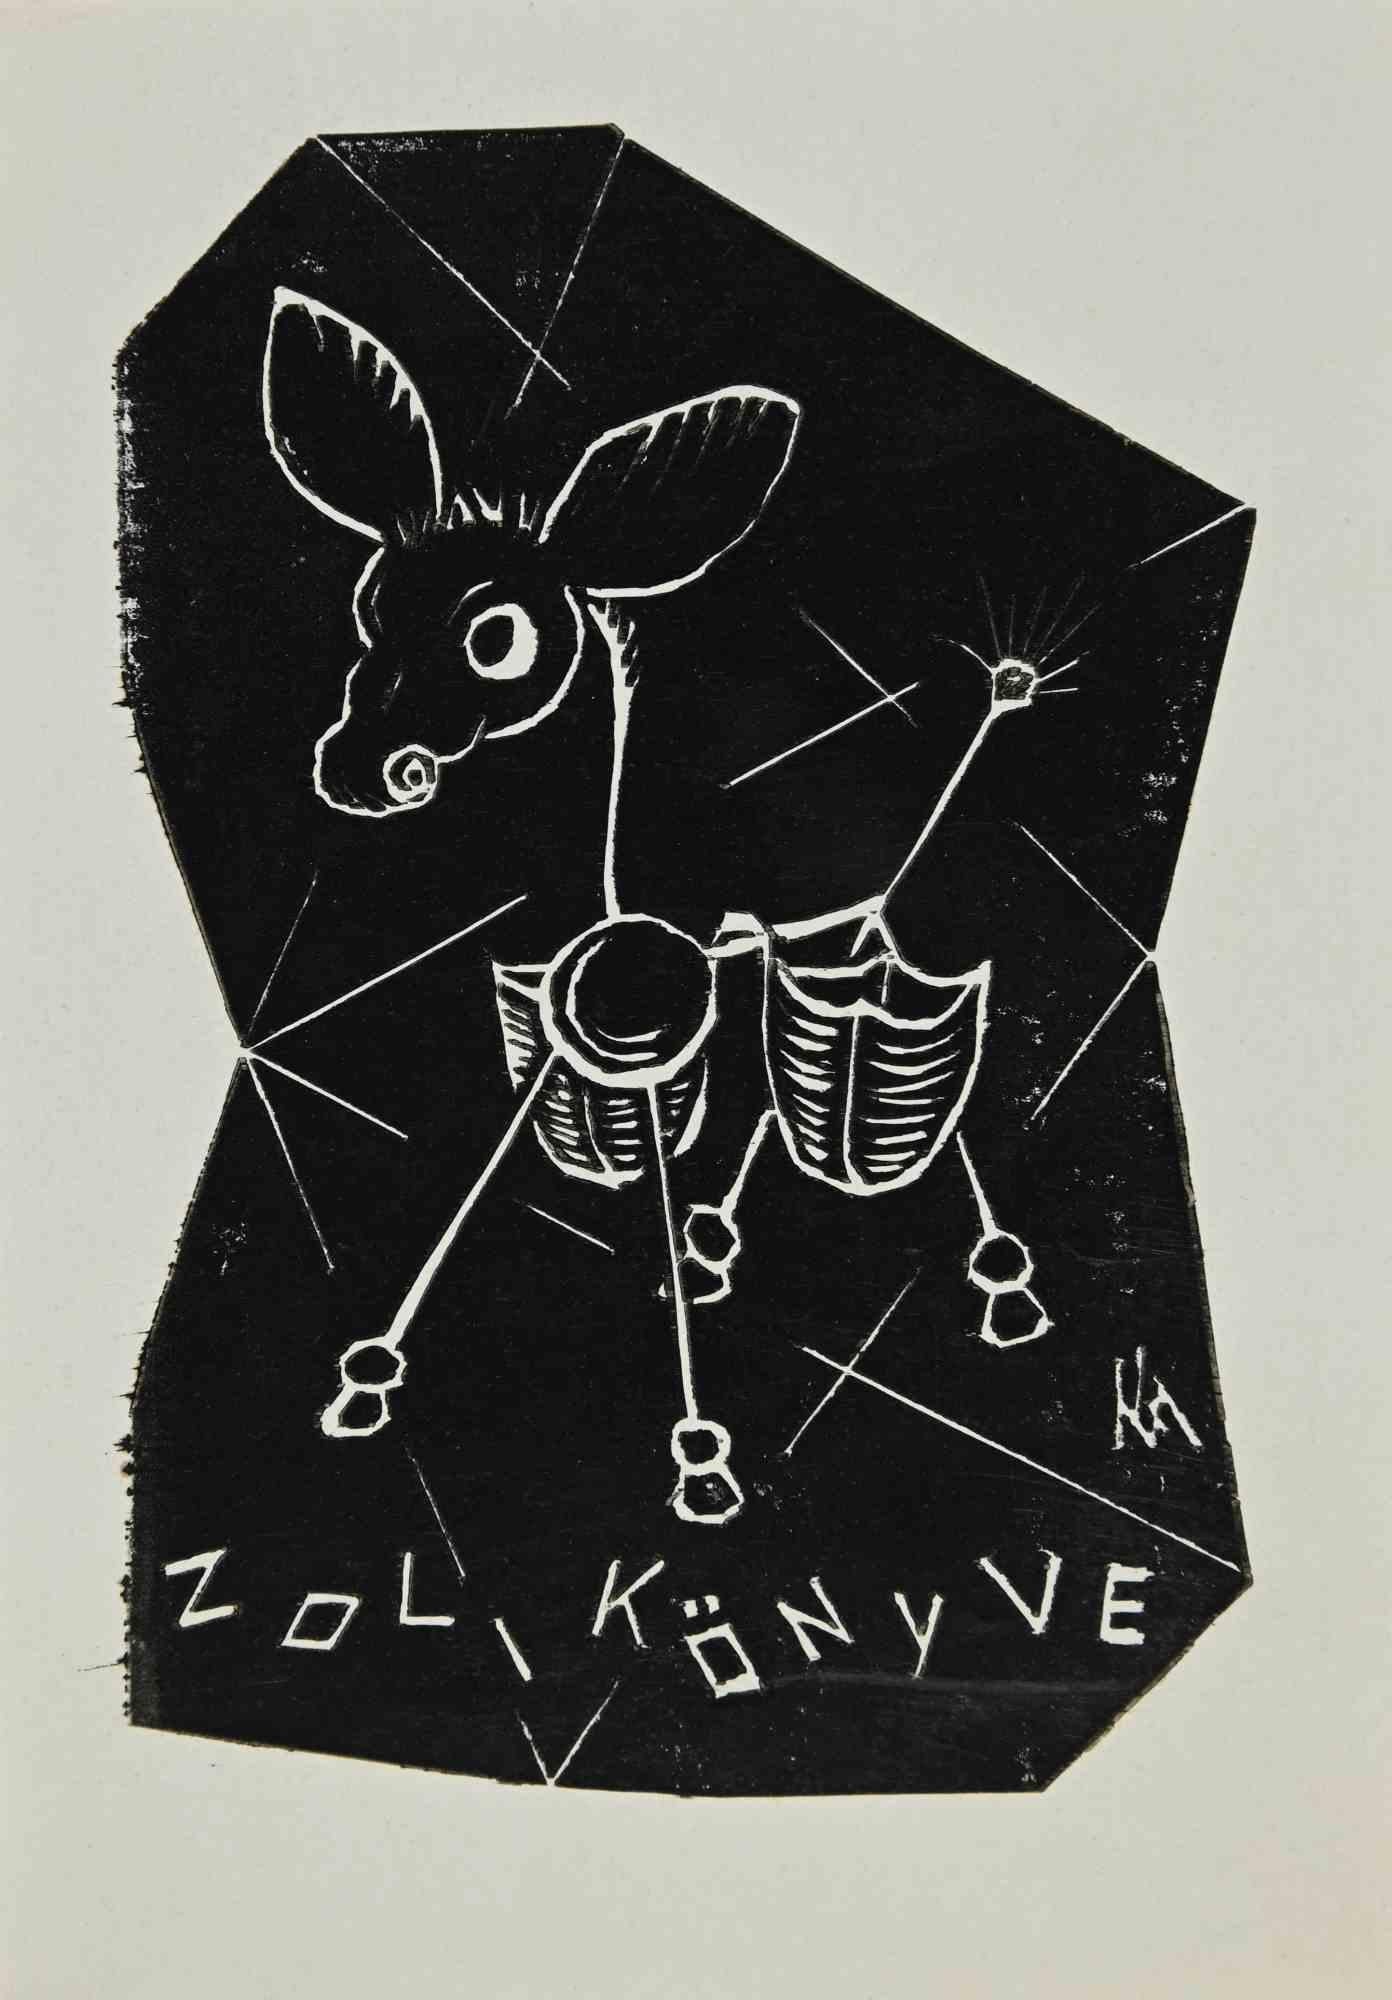 Ex libris - Zoli Könyve is an Artwork realized in 20 Century, by  József Kiss. 

Woodcut print on ivory paper.  Monogammed on plate on the right corner.

Good conditions.

The artist wants to define a well-balanced composition, through preciseness